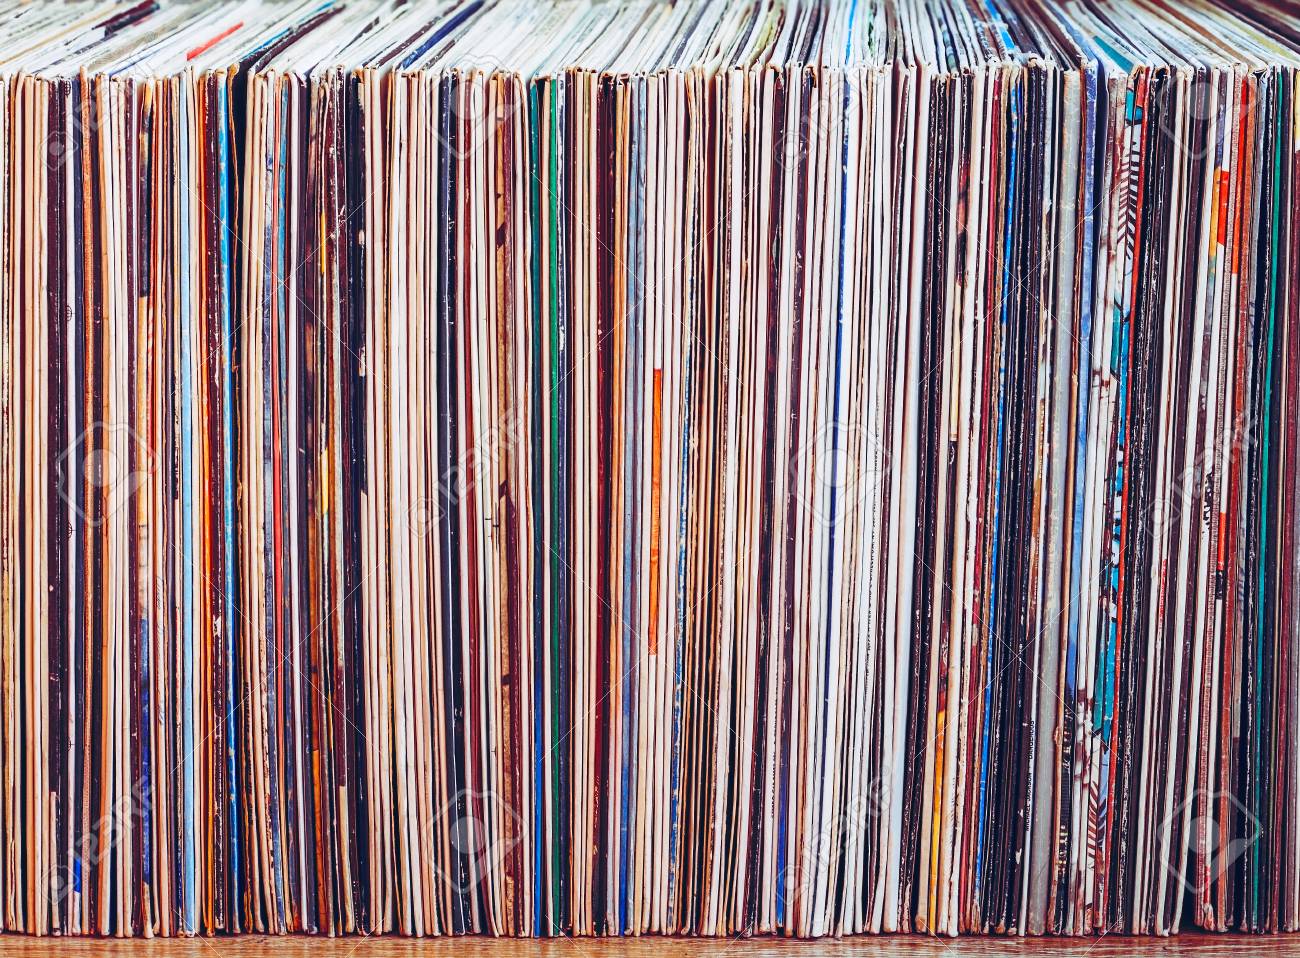 Detail Images Of Record Albums Nomer 39